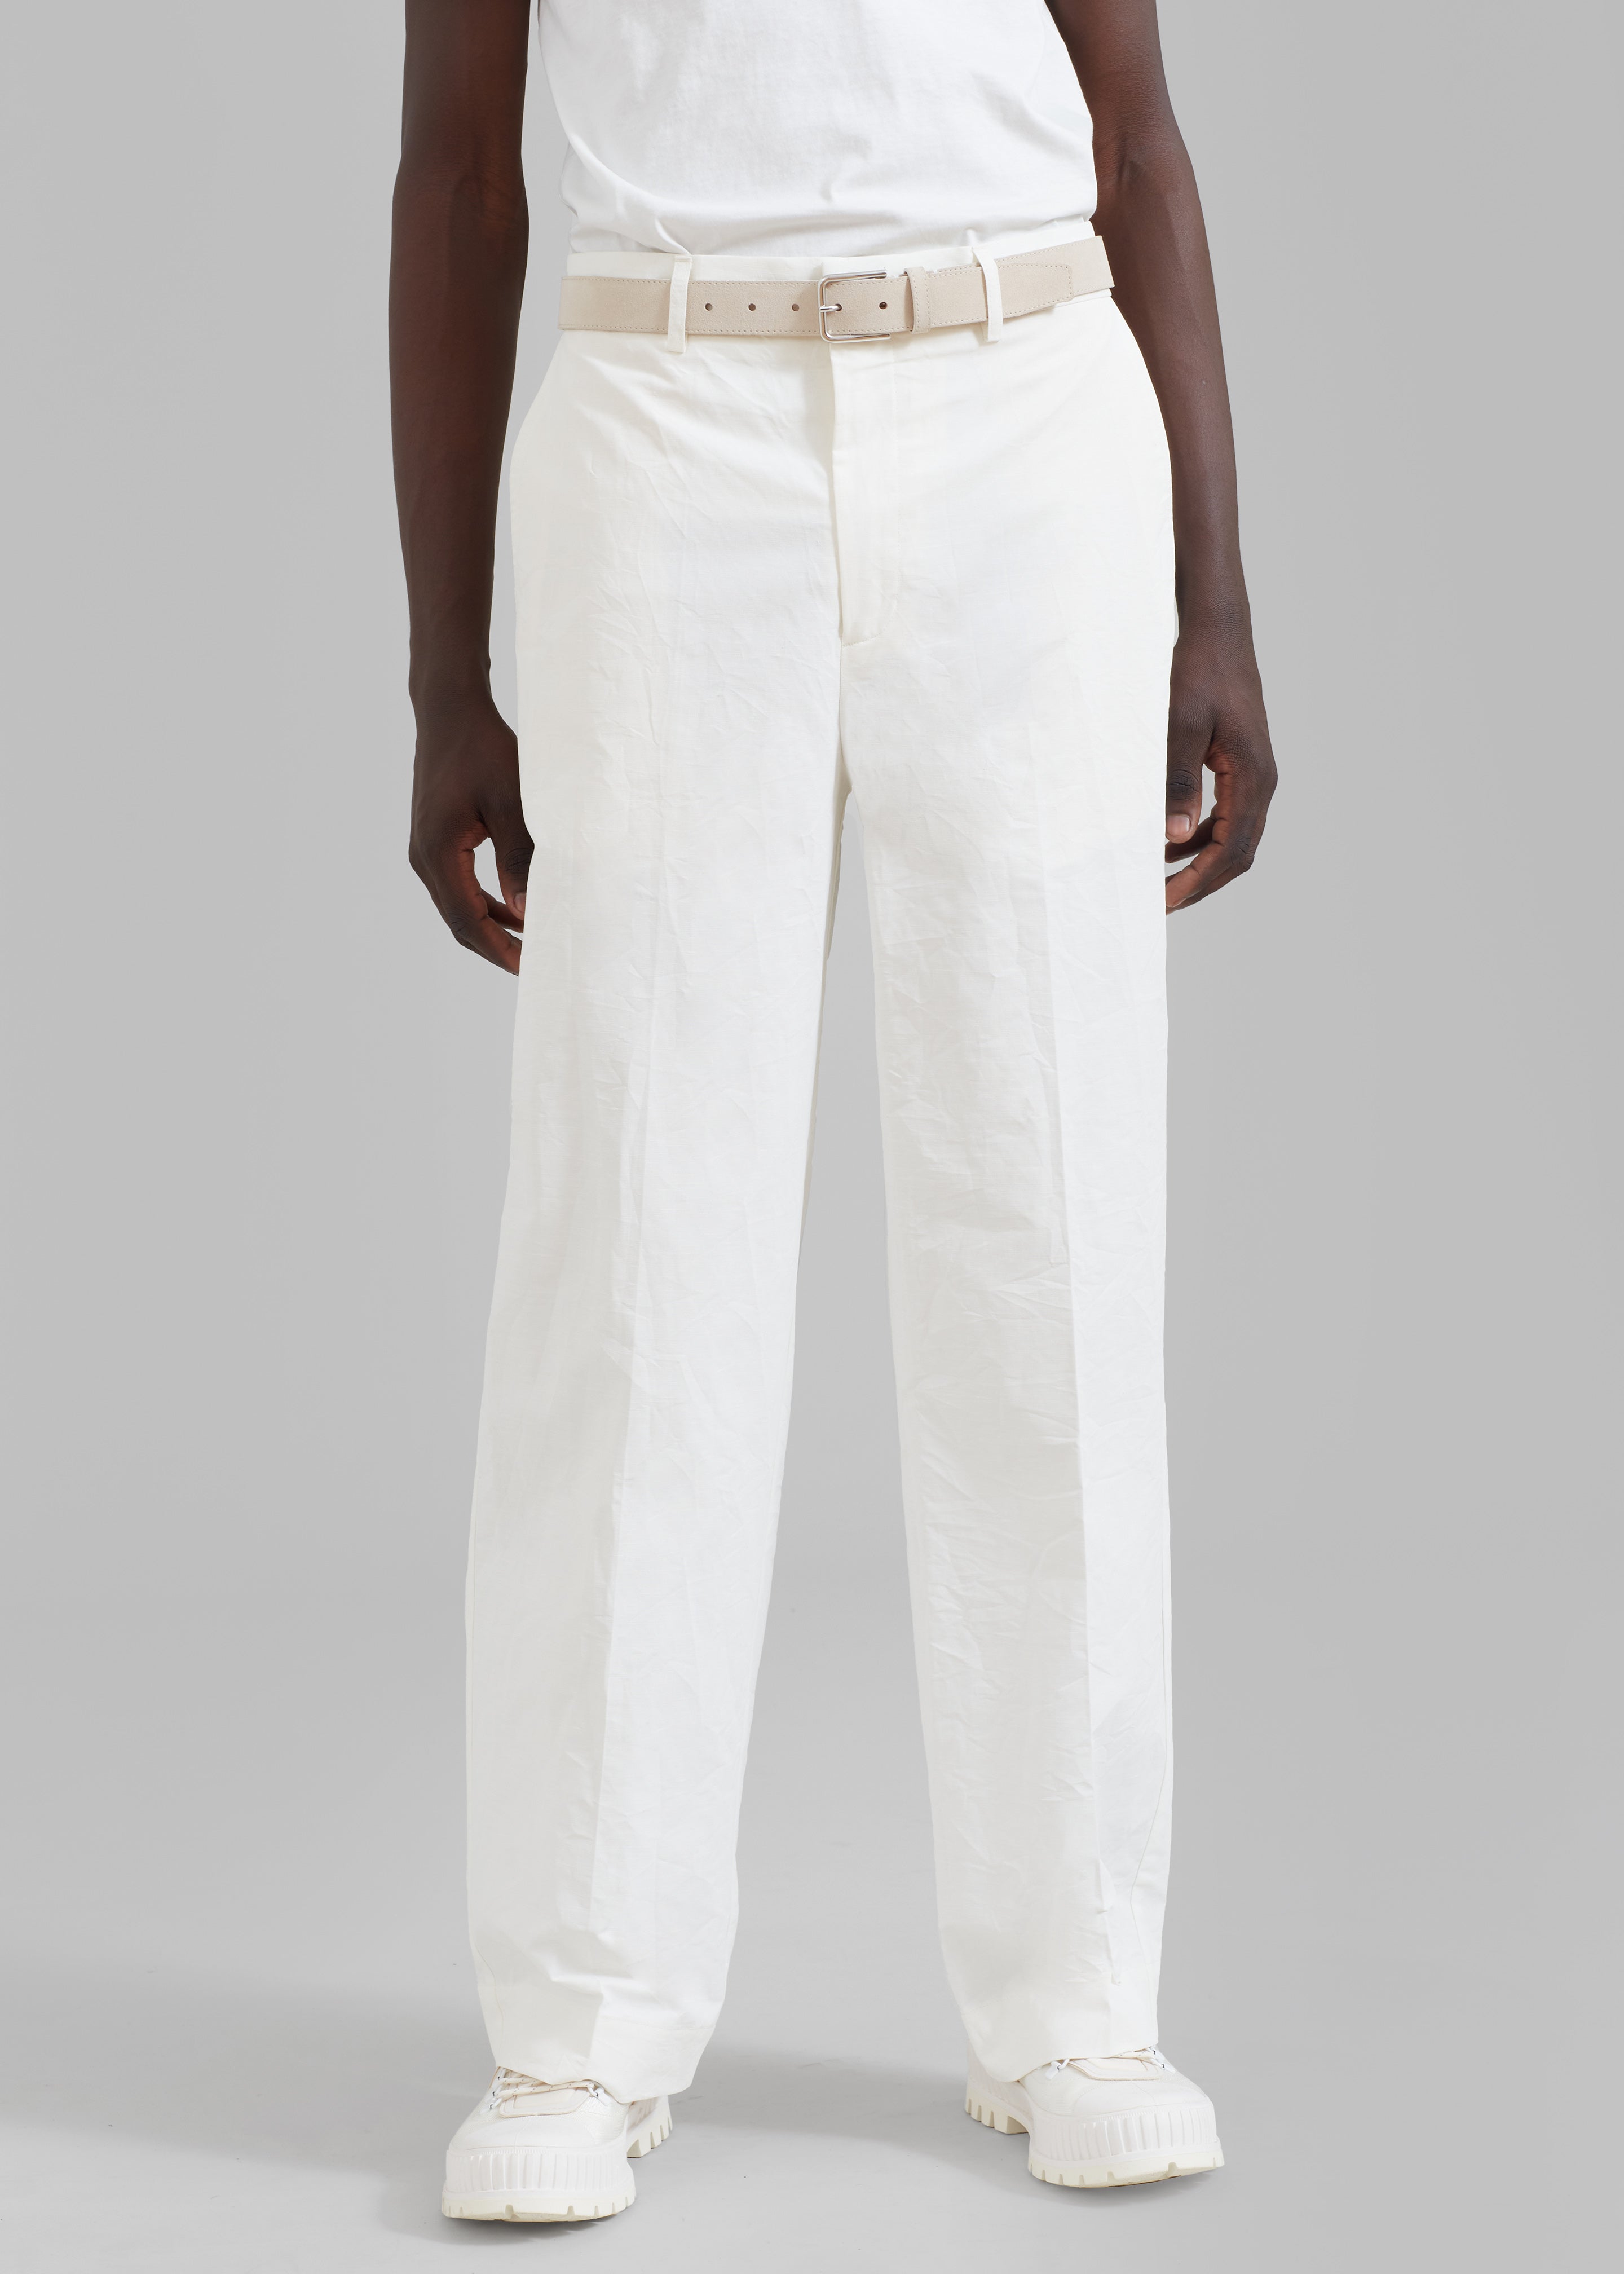 Róhe Crushed Cotton Trousers - Chalk - 5